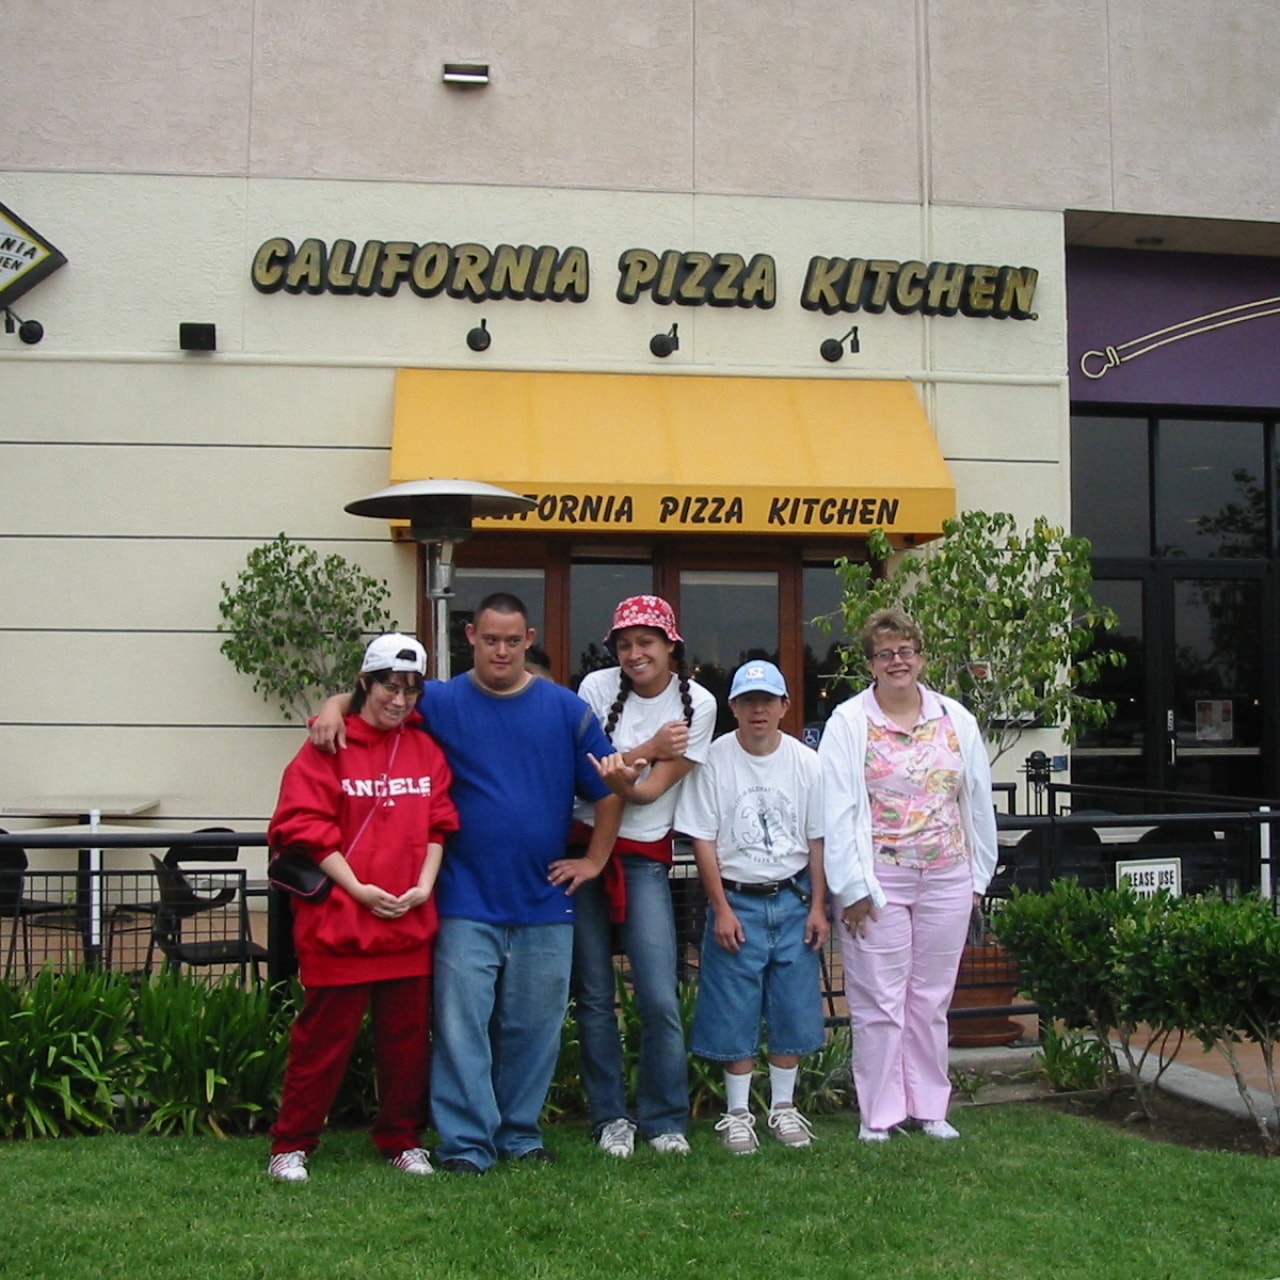 A group of employees from Goodwill are standing in front of the California Pizza Kitchen restaurant.